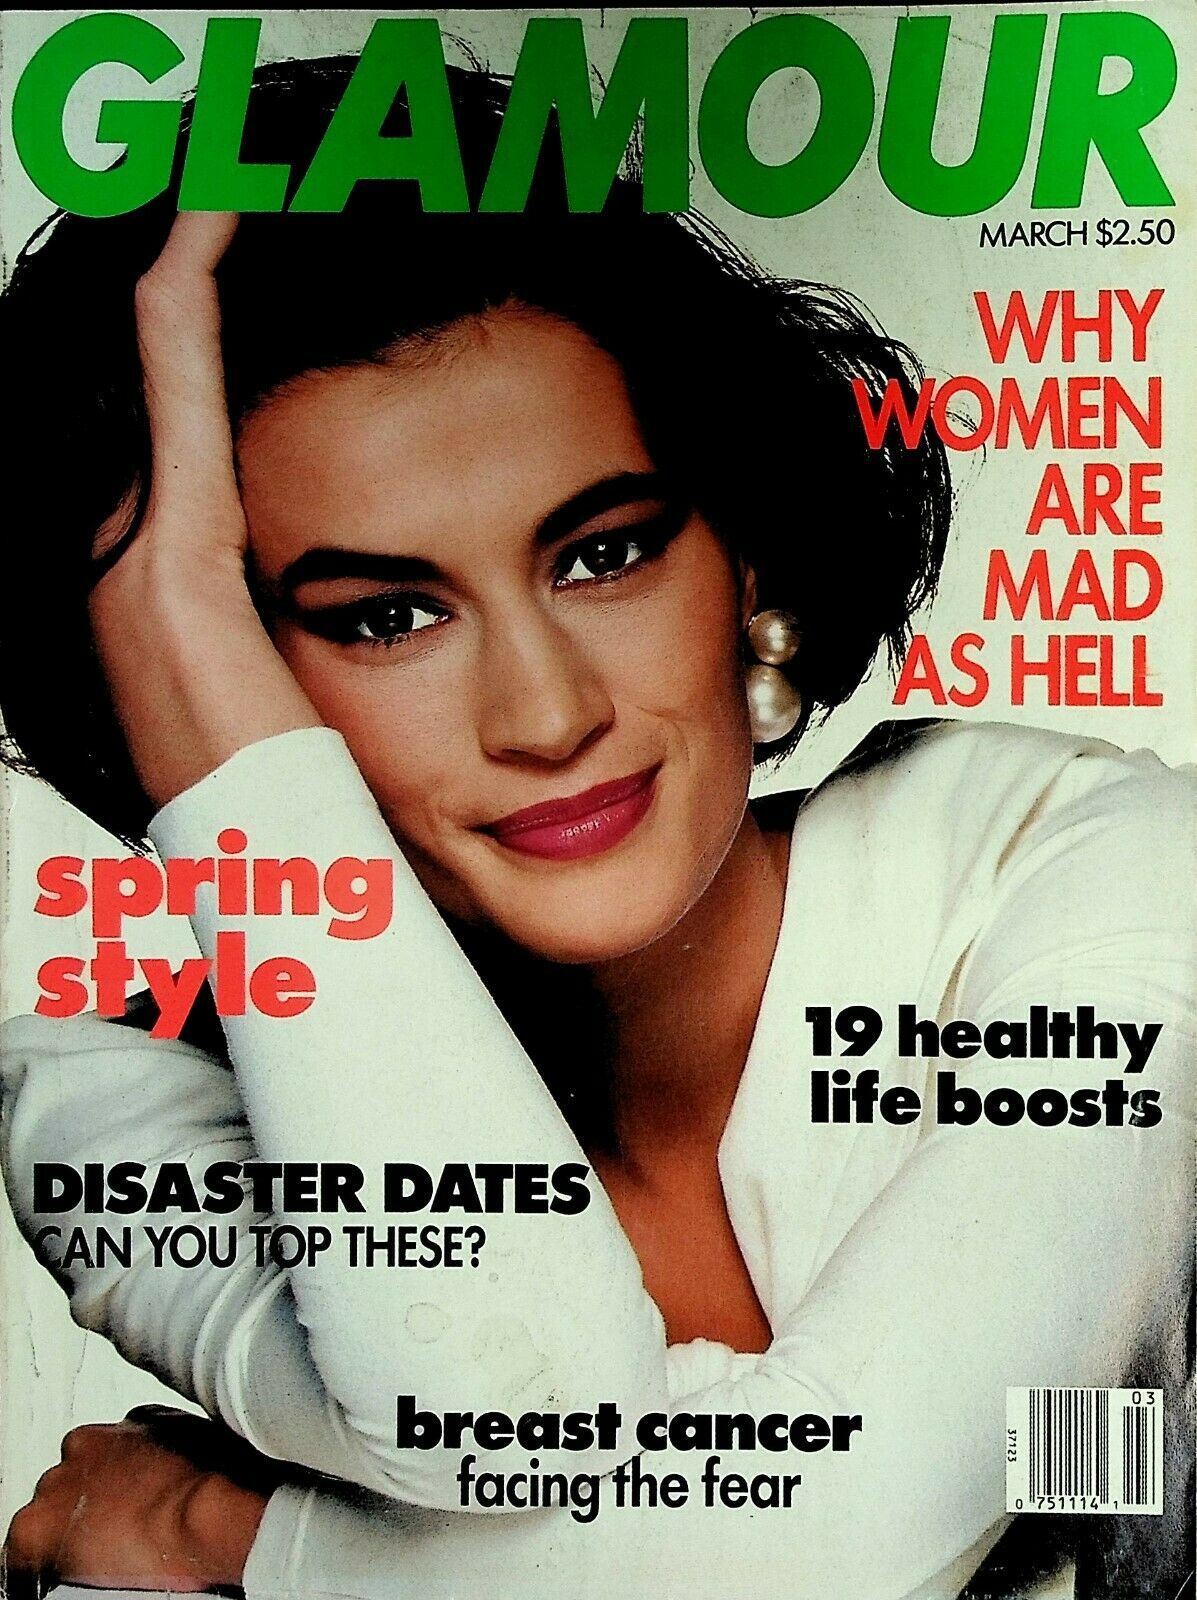 Glamour March 1992 magazine back issue Glamour magizine back copy Glamour March 1992 Womens Magazine Back Issue Published by Conde Nast Publications. Why Women Are Mad As Hell.